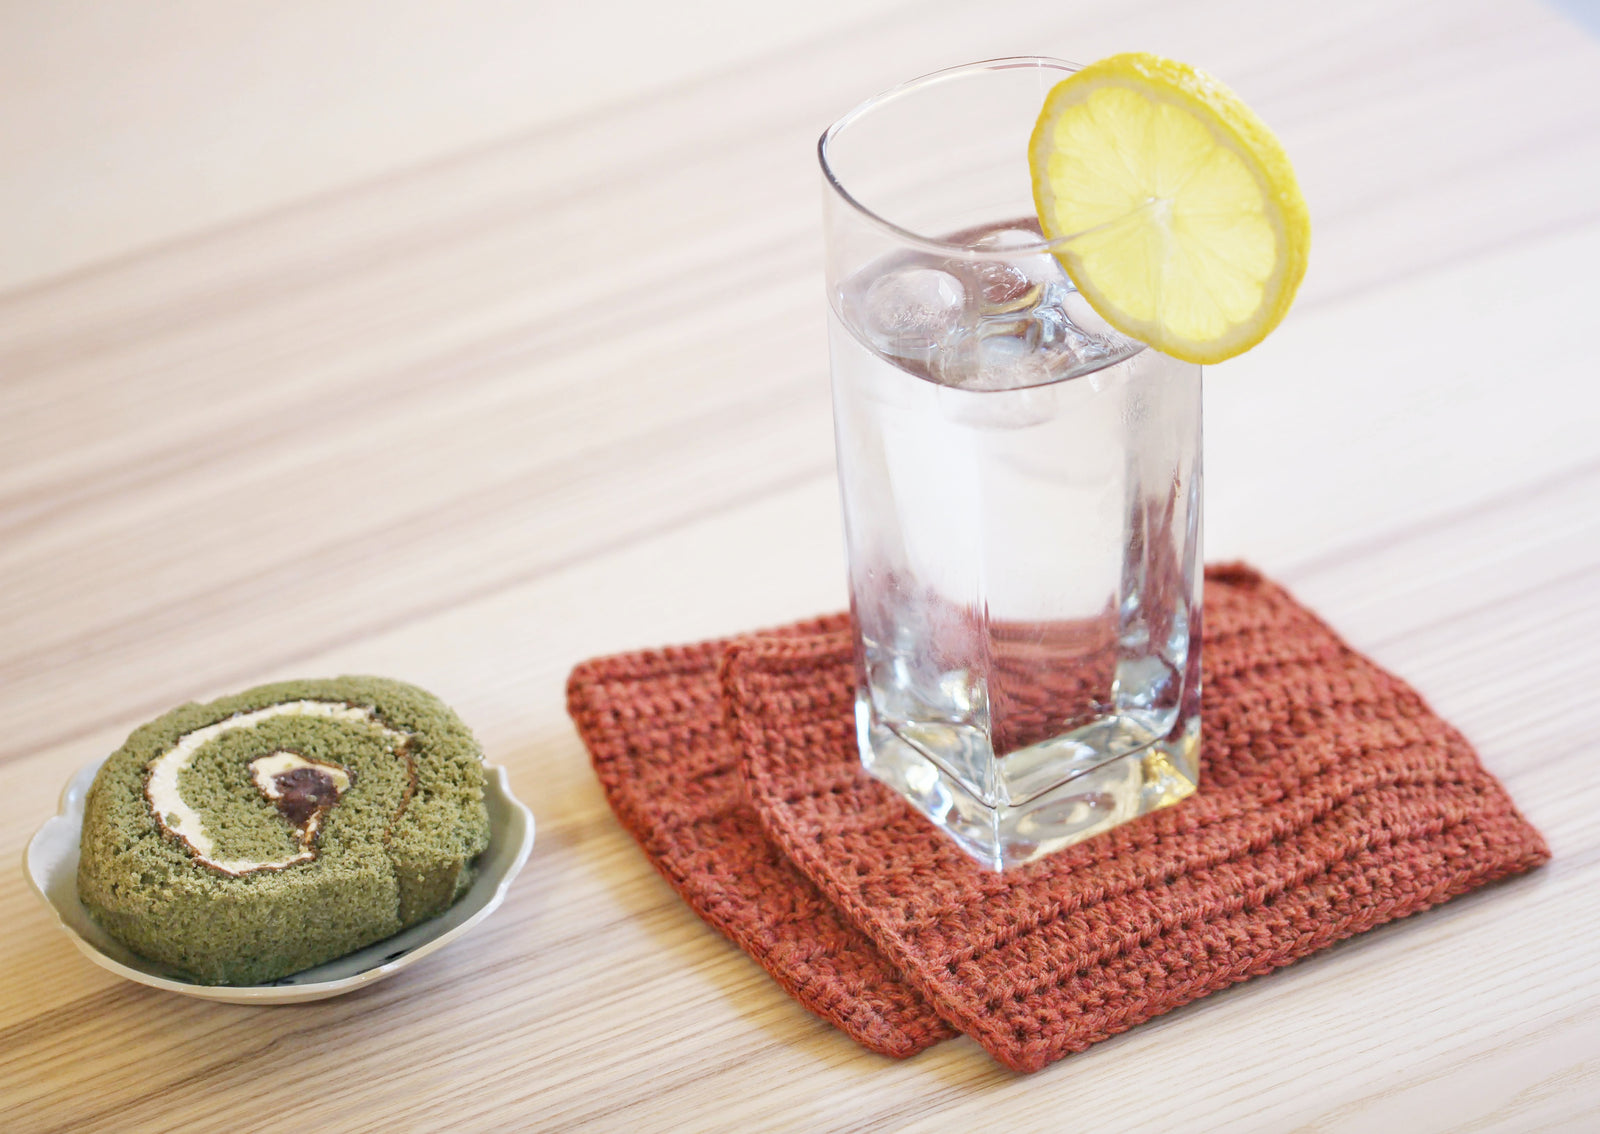 CROCHET CLASS: Make Your Own Washcloth or Coaster